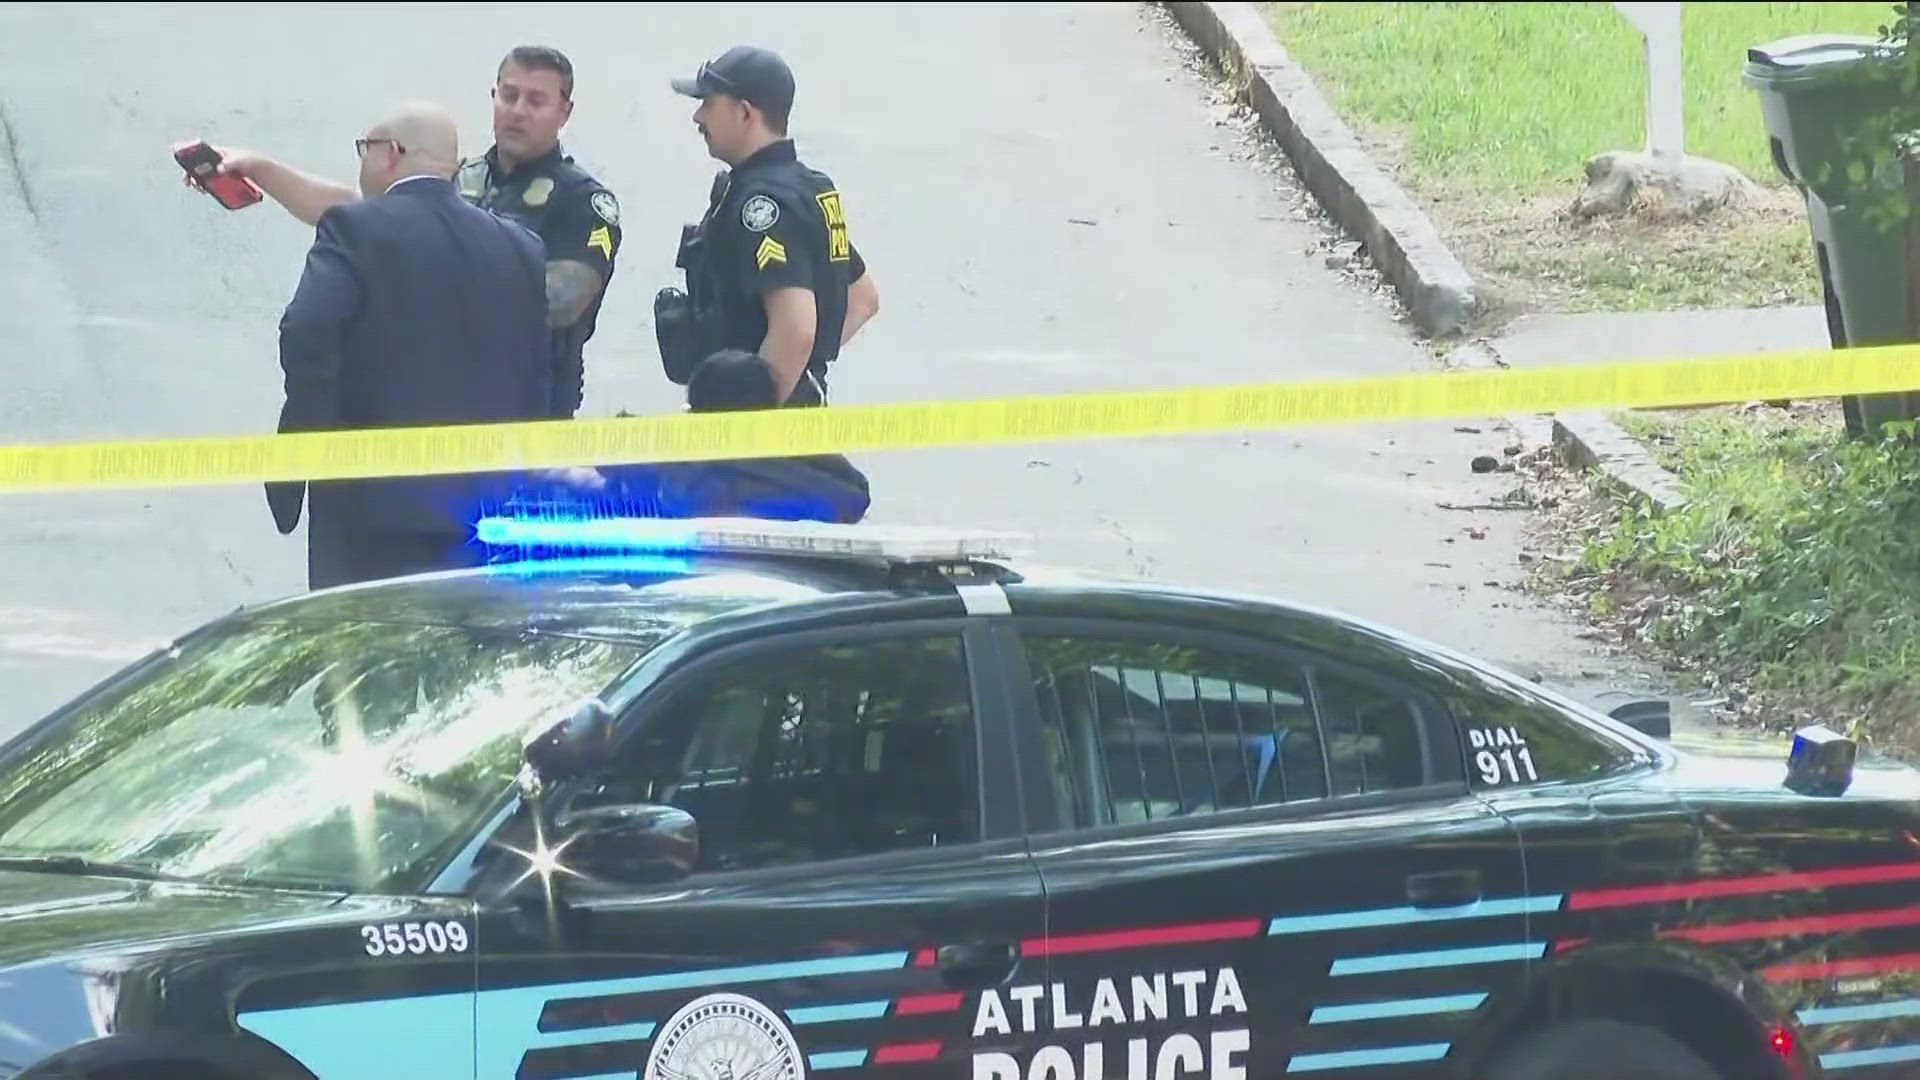 According to APD, officers responded to a report of a person shot shortly after 3:30 p.m. on Baker Drive Southwest.